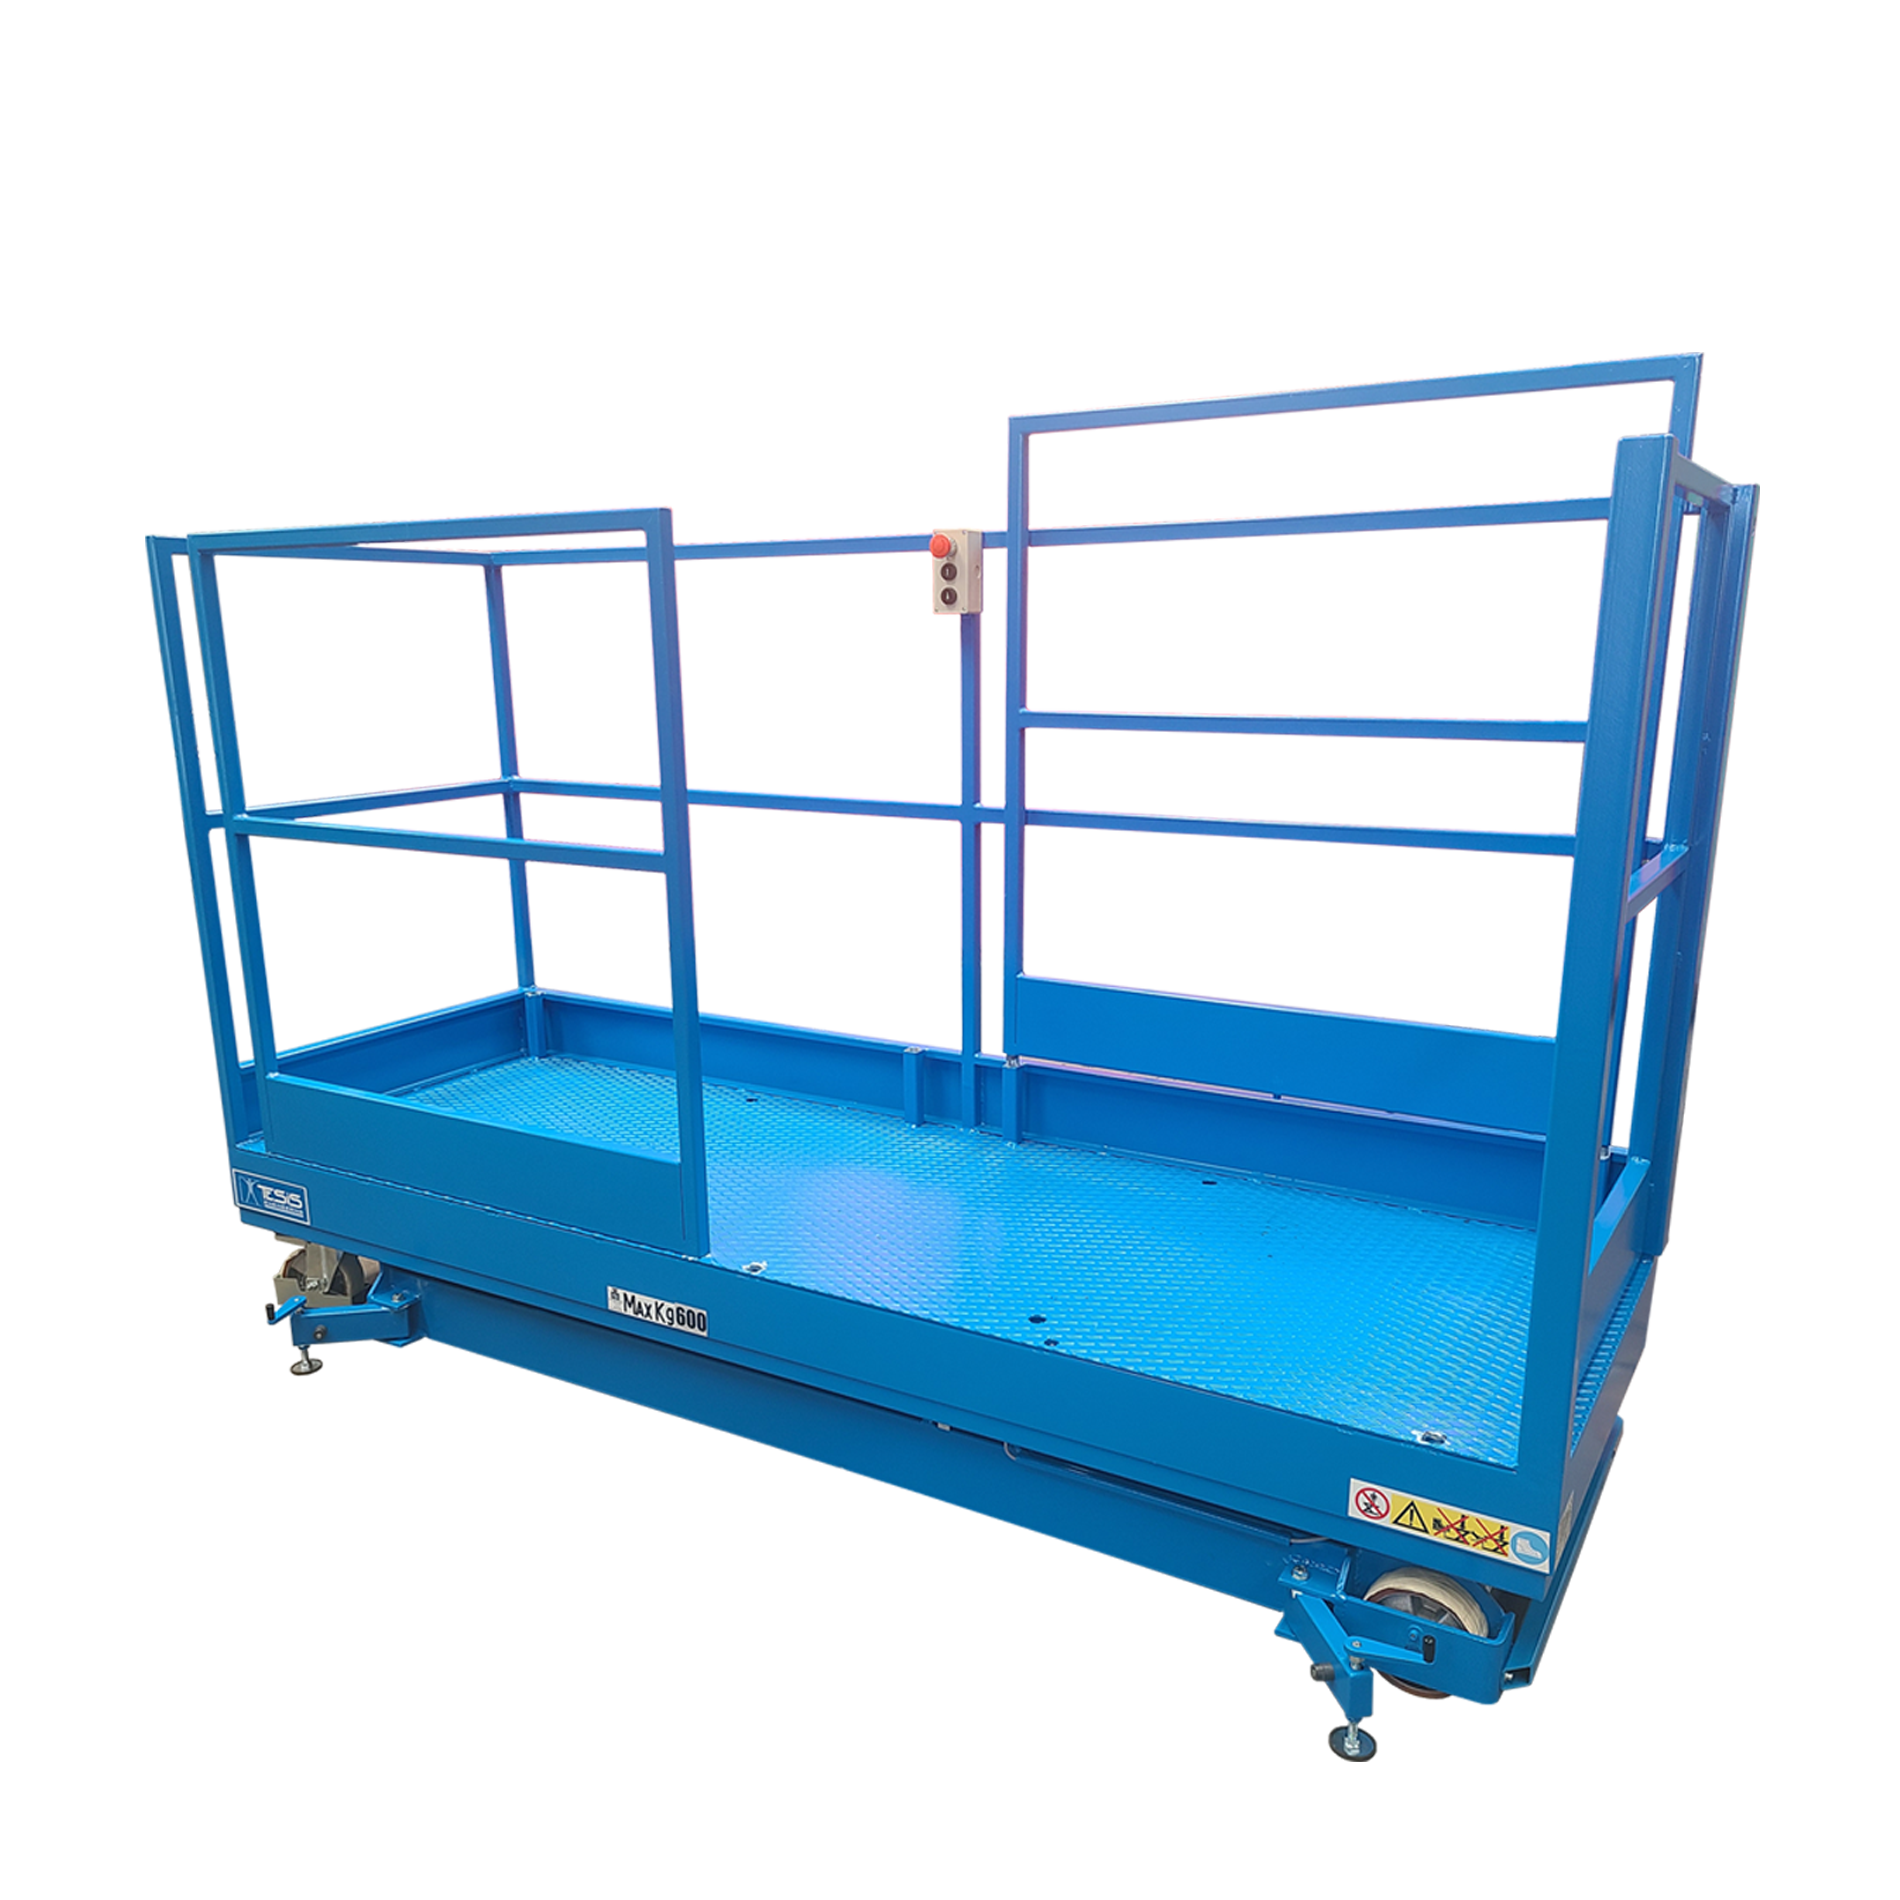 Mobile worker elevating platform with removable guardrail sections - carousel scissor lifts - worker elevating platforms - worker scissor lifts - carousel lift tables - mobile work platform lifts